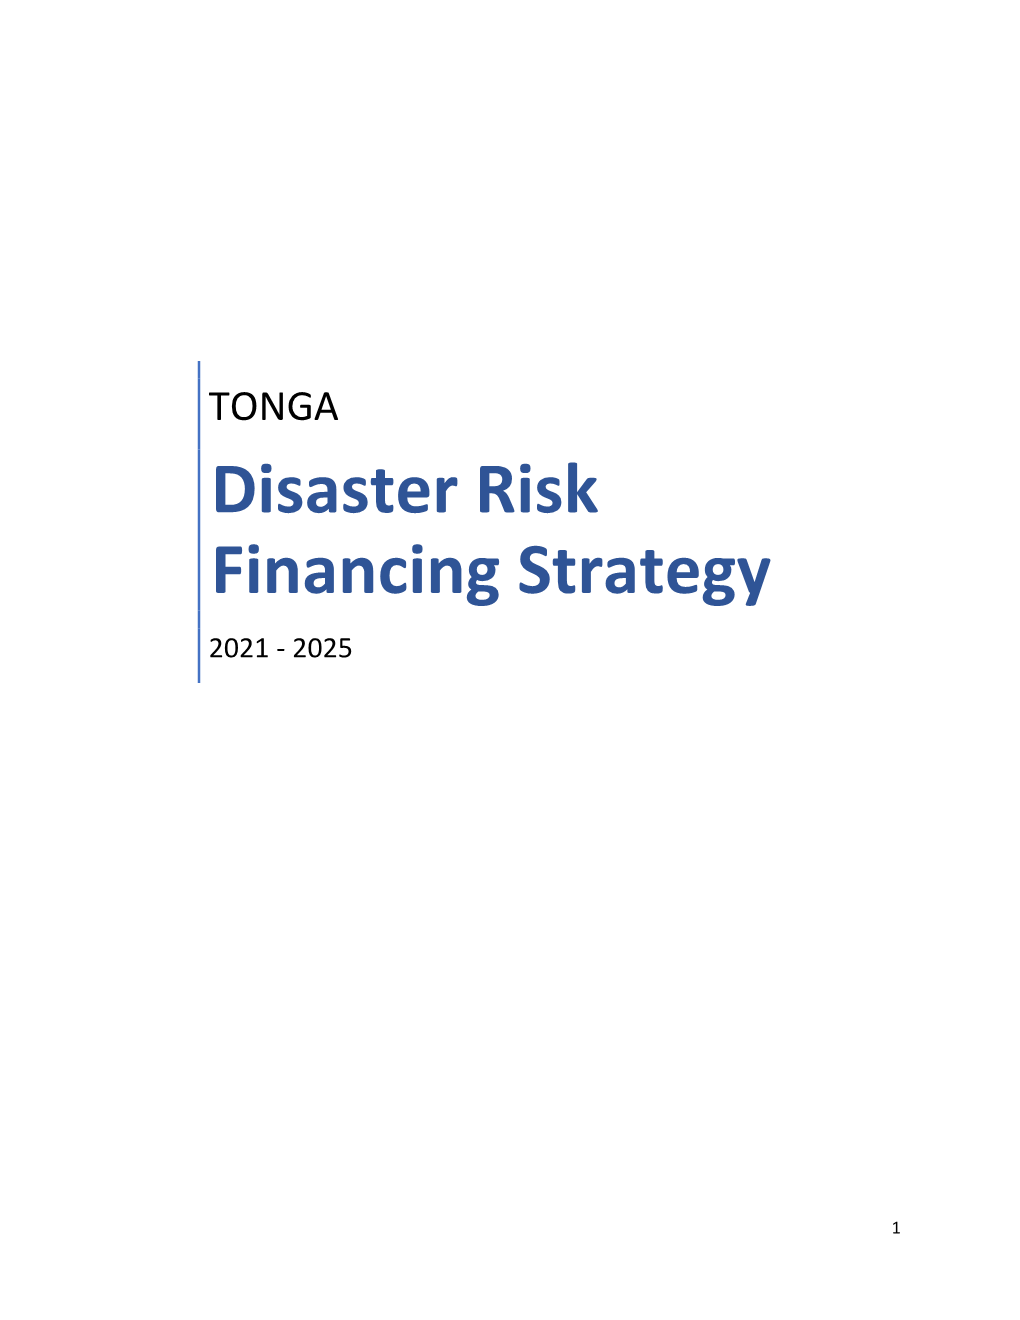 Tonga Disaster Risk Financing Strategy 2021-2025